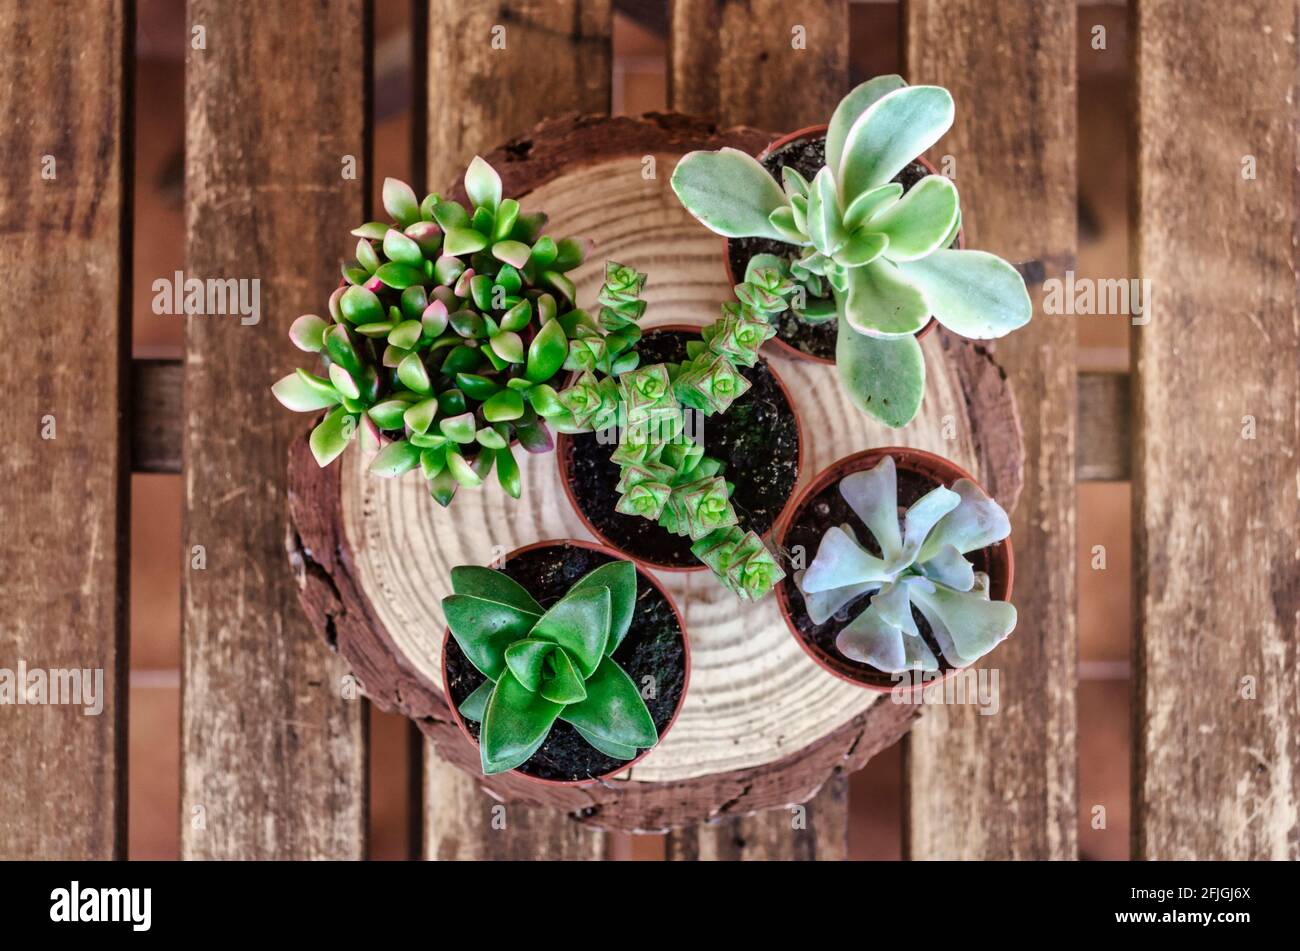 Top view of potted succulent plants.  Wooden background. Stock Photo